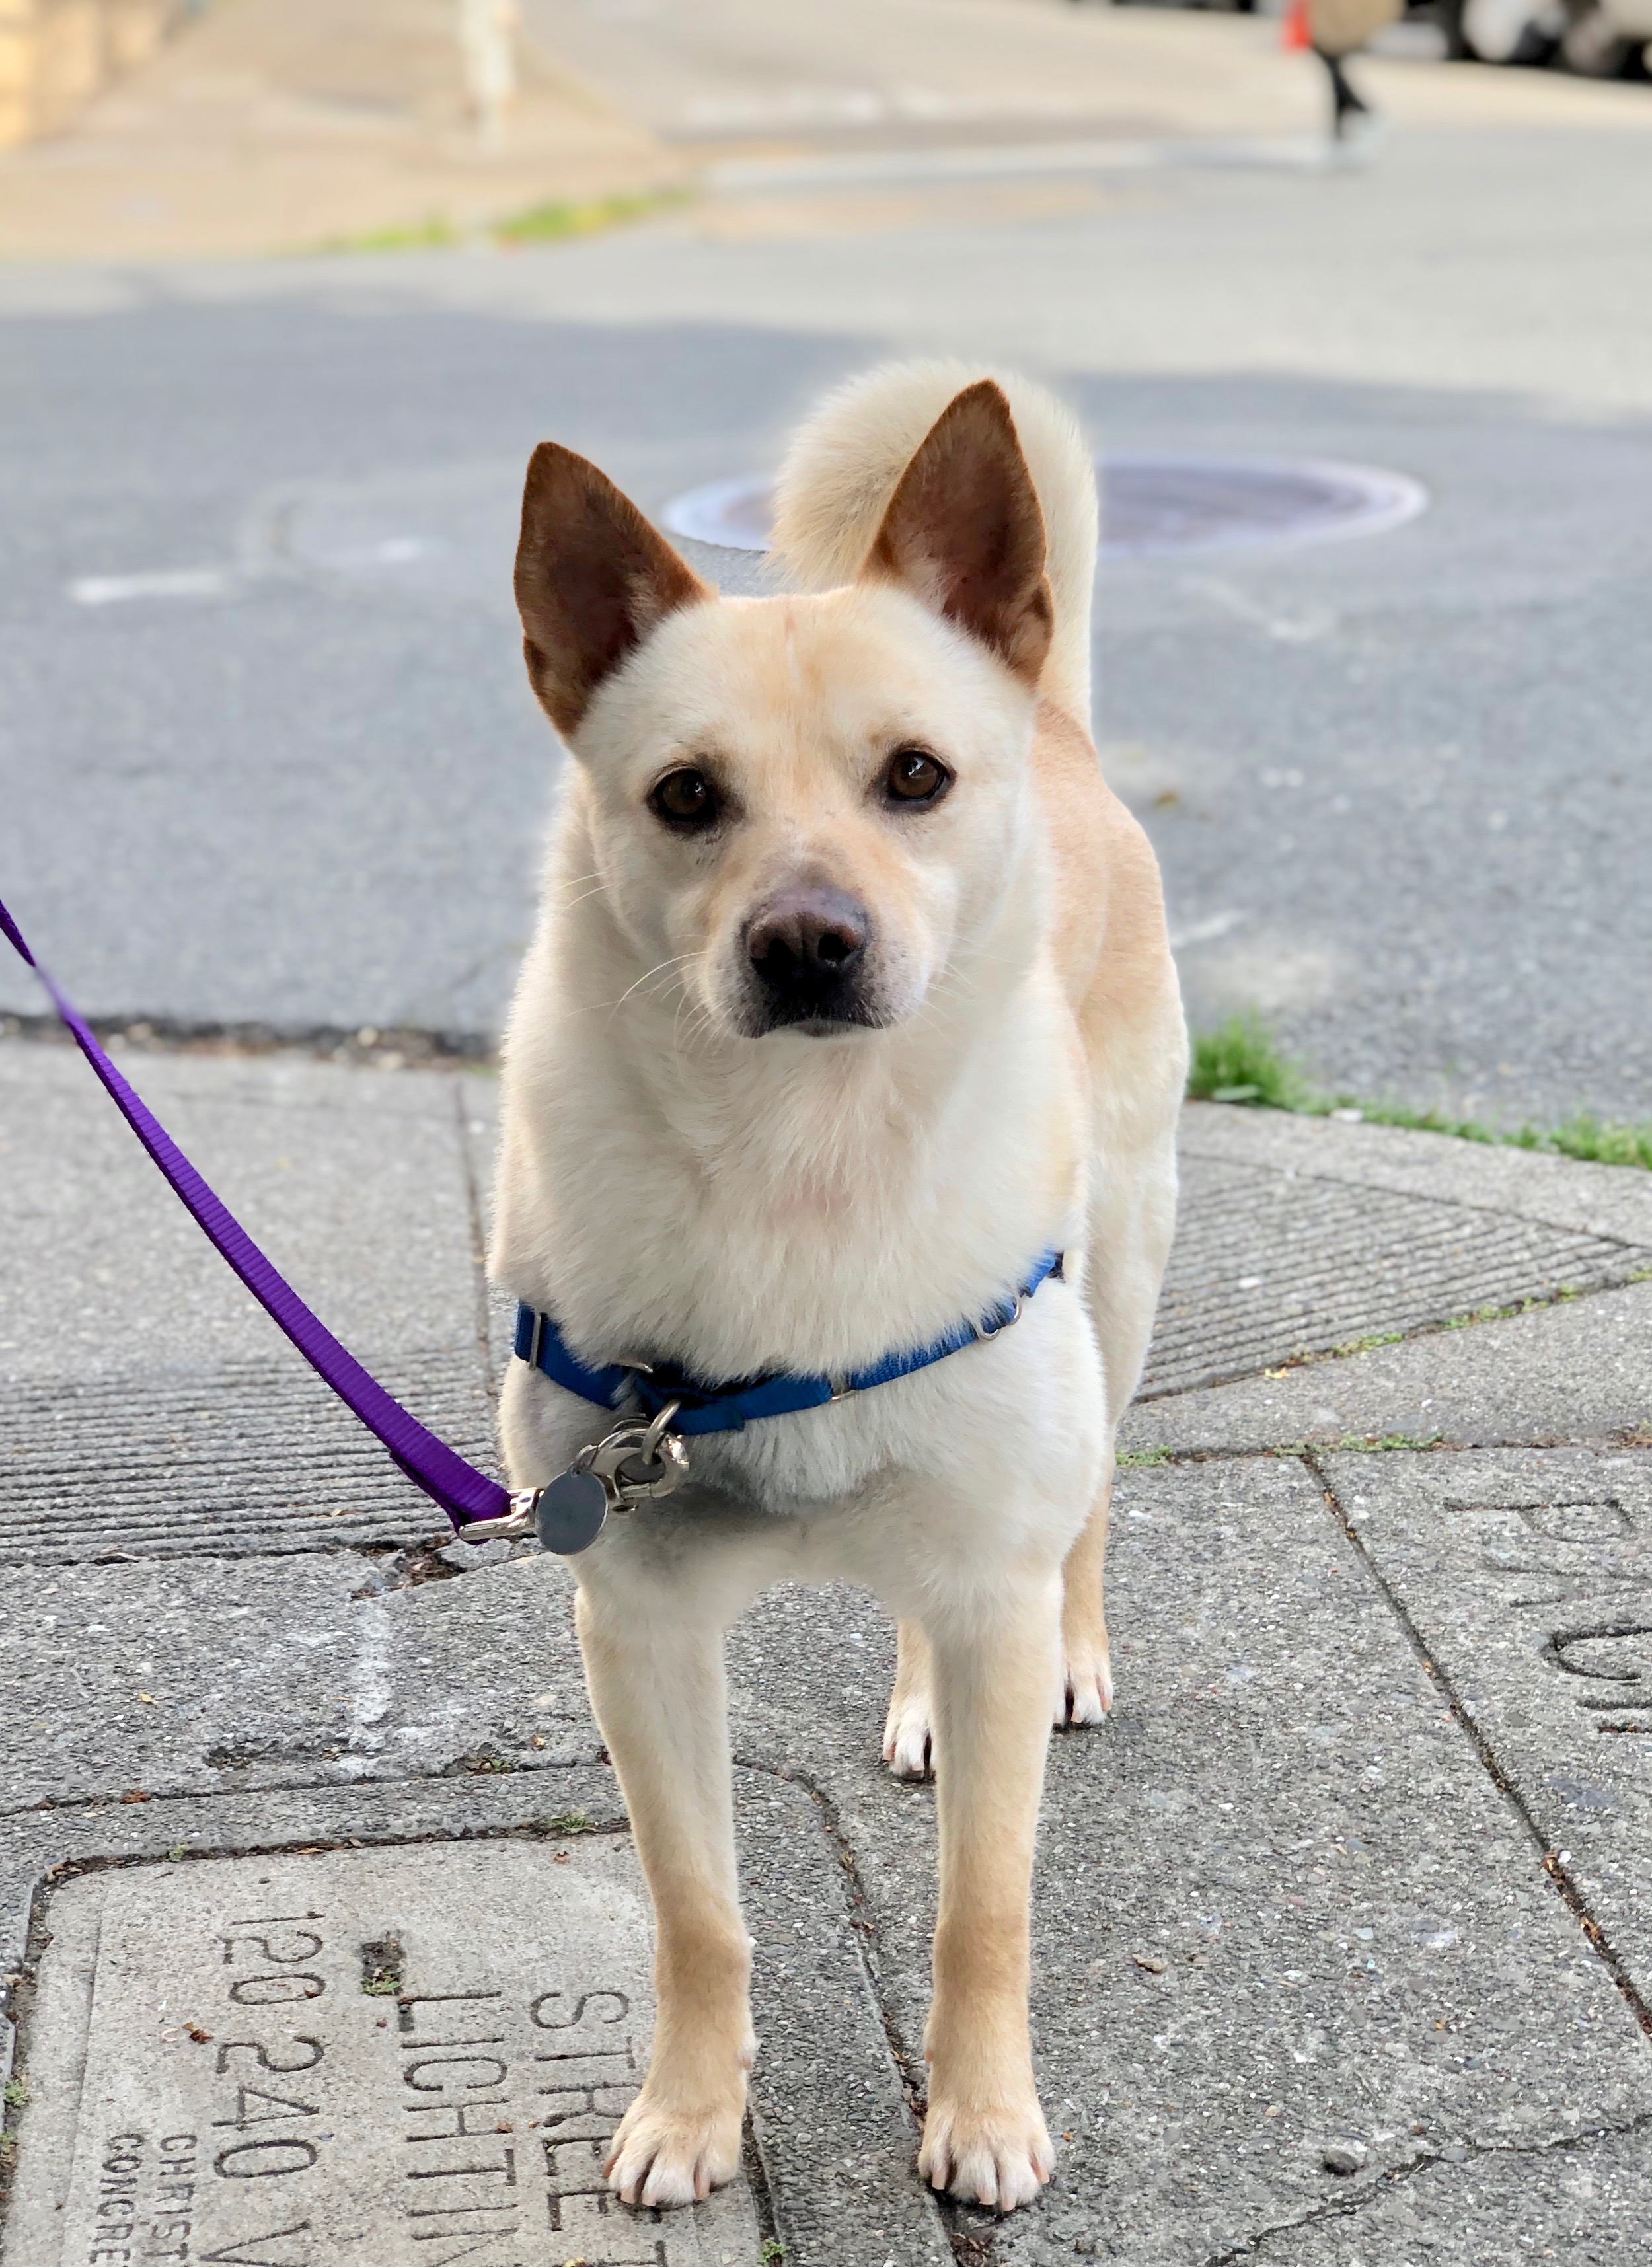 Dog Of The Day Oatmeal The Shiba Inu Mix The Dogs Of San Francisco